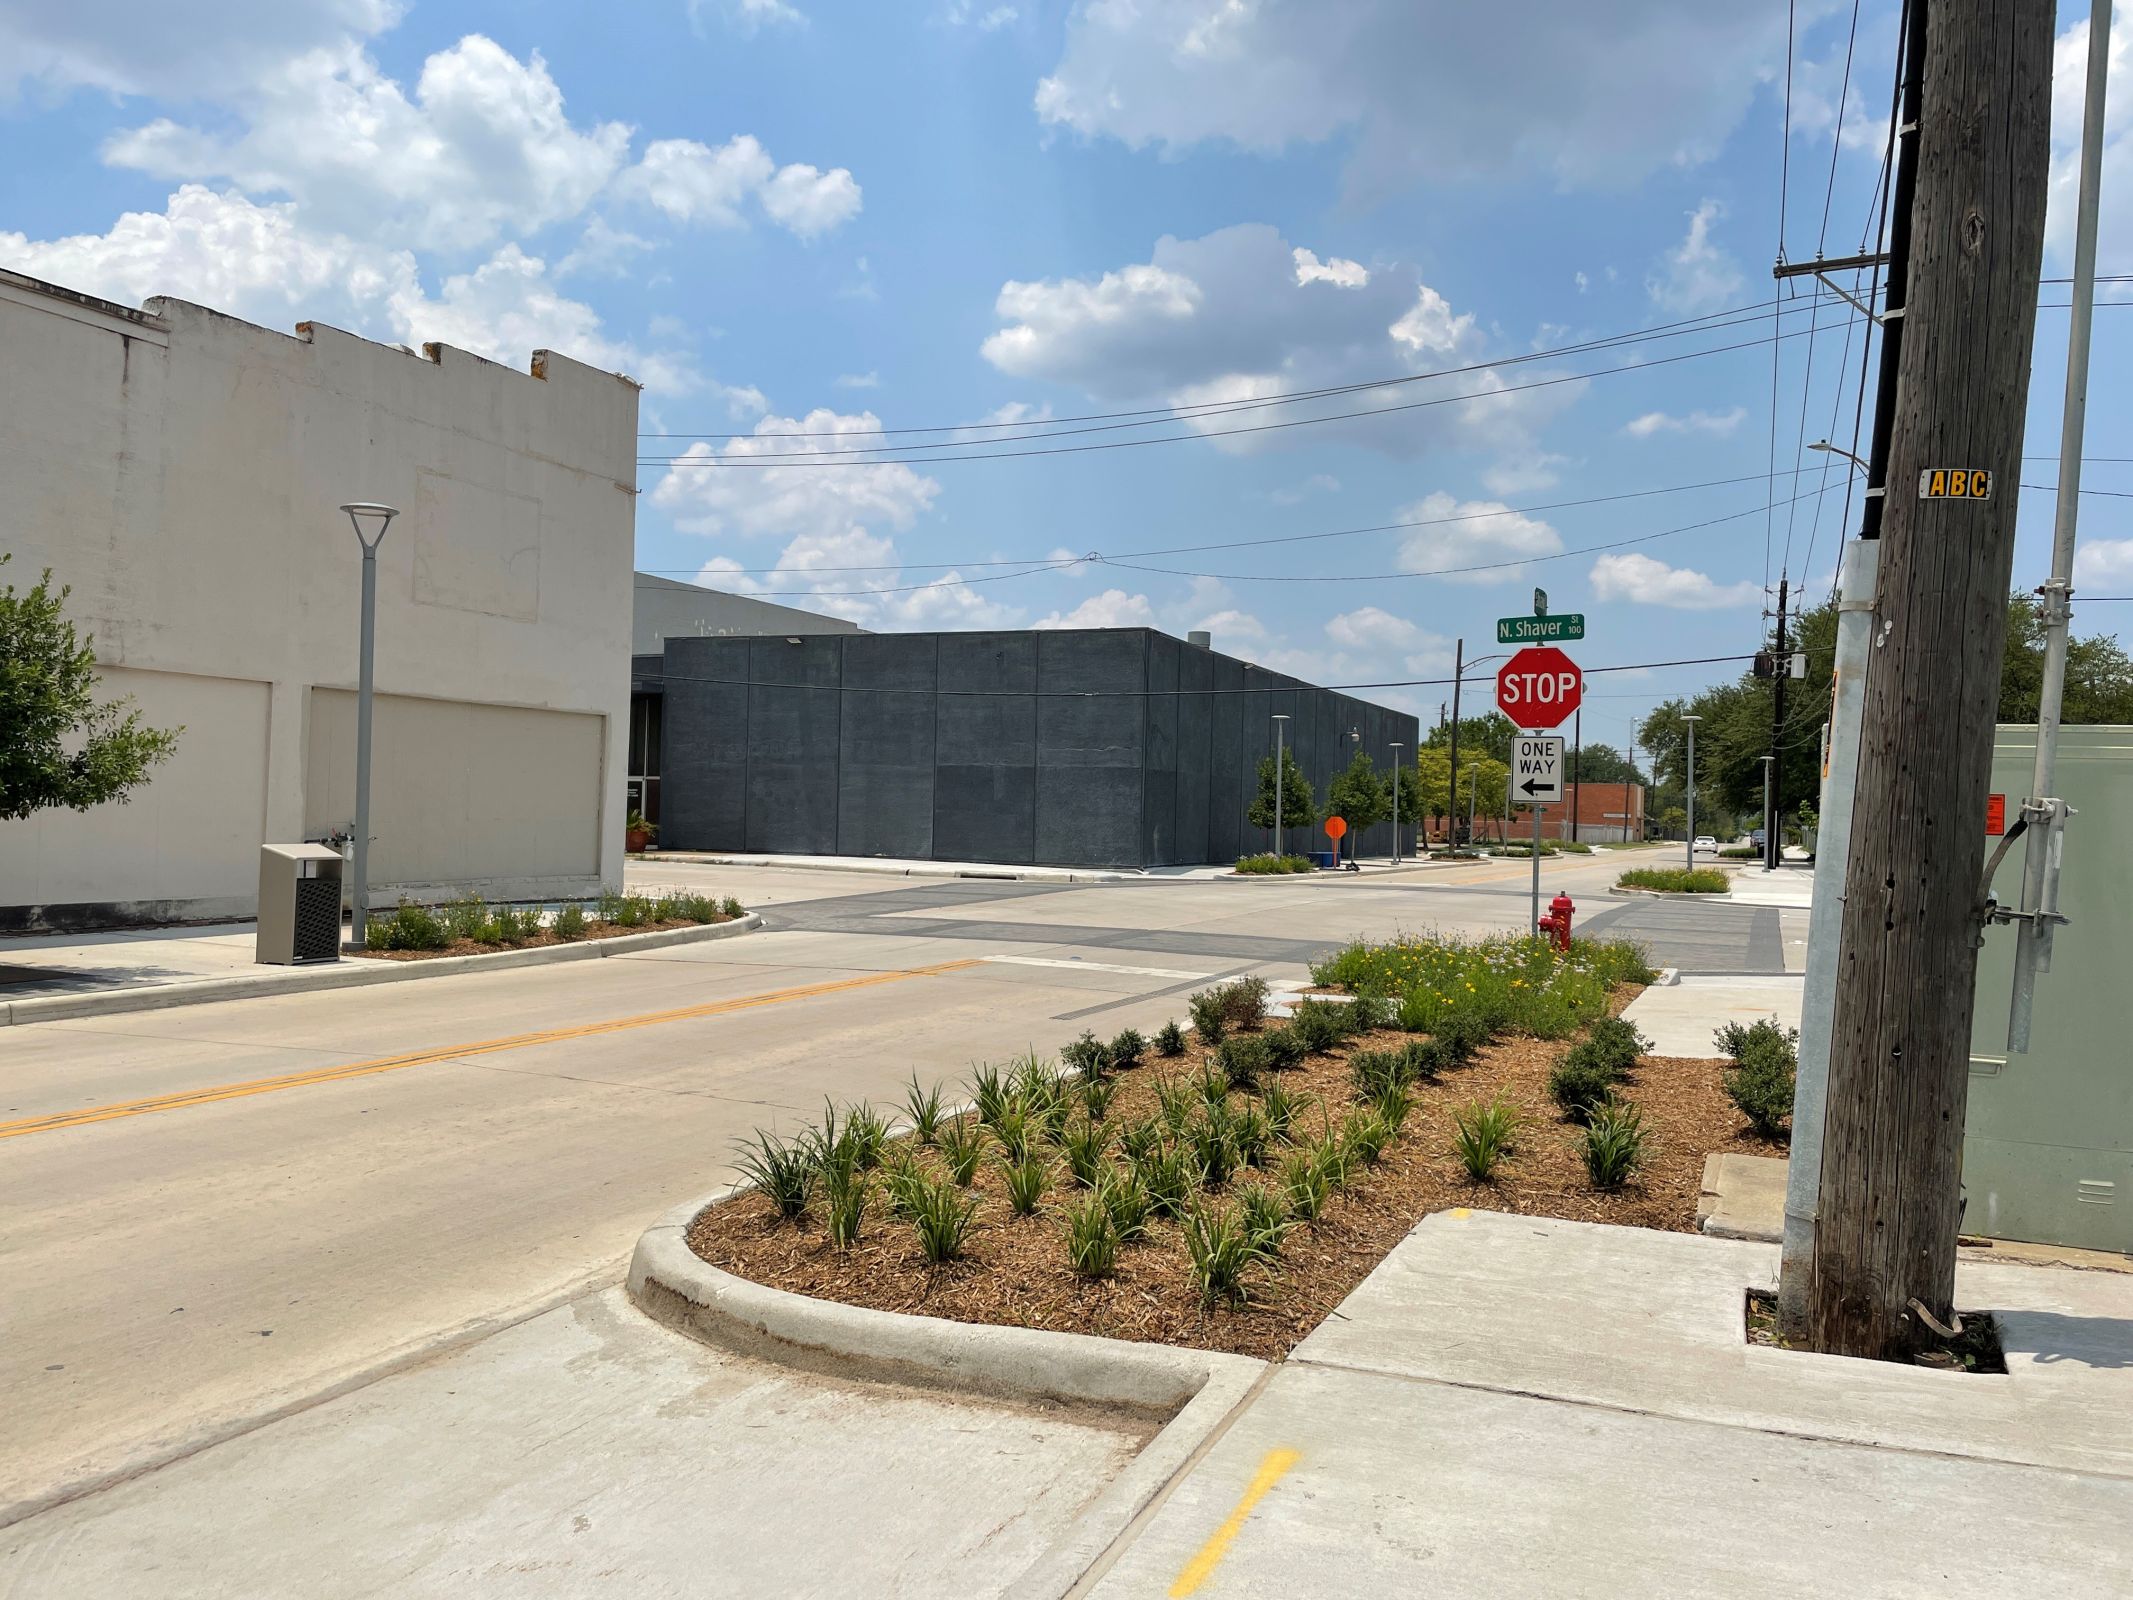 Landscaping, sidewalk and parking at intersection of Shaw Ave & Shaver St